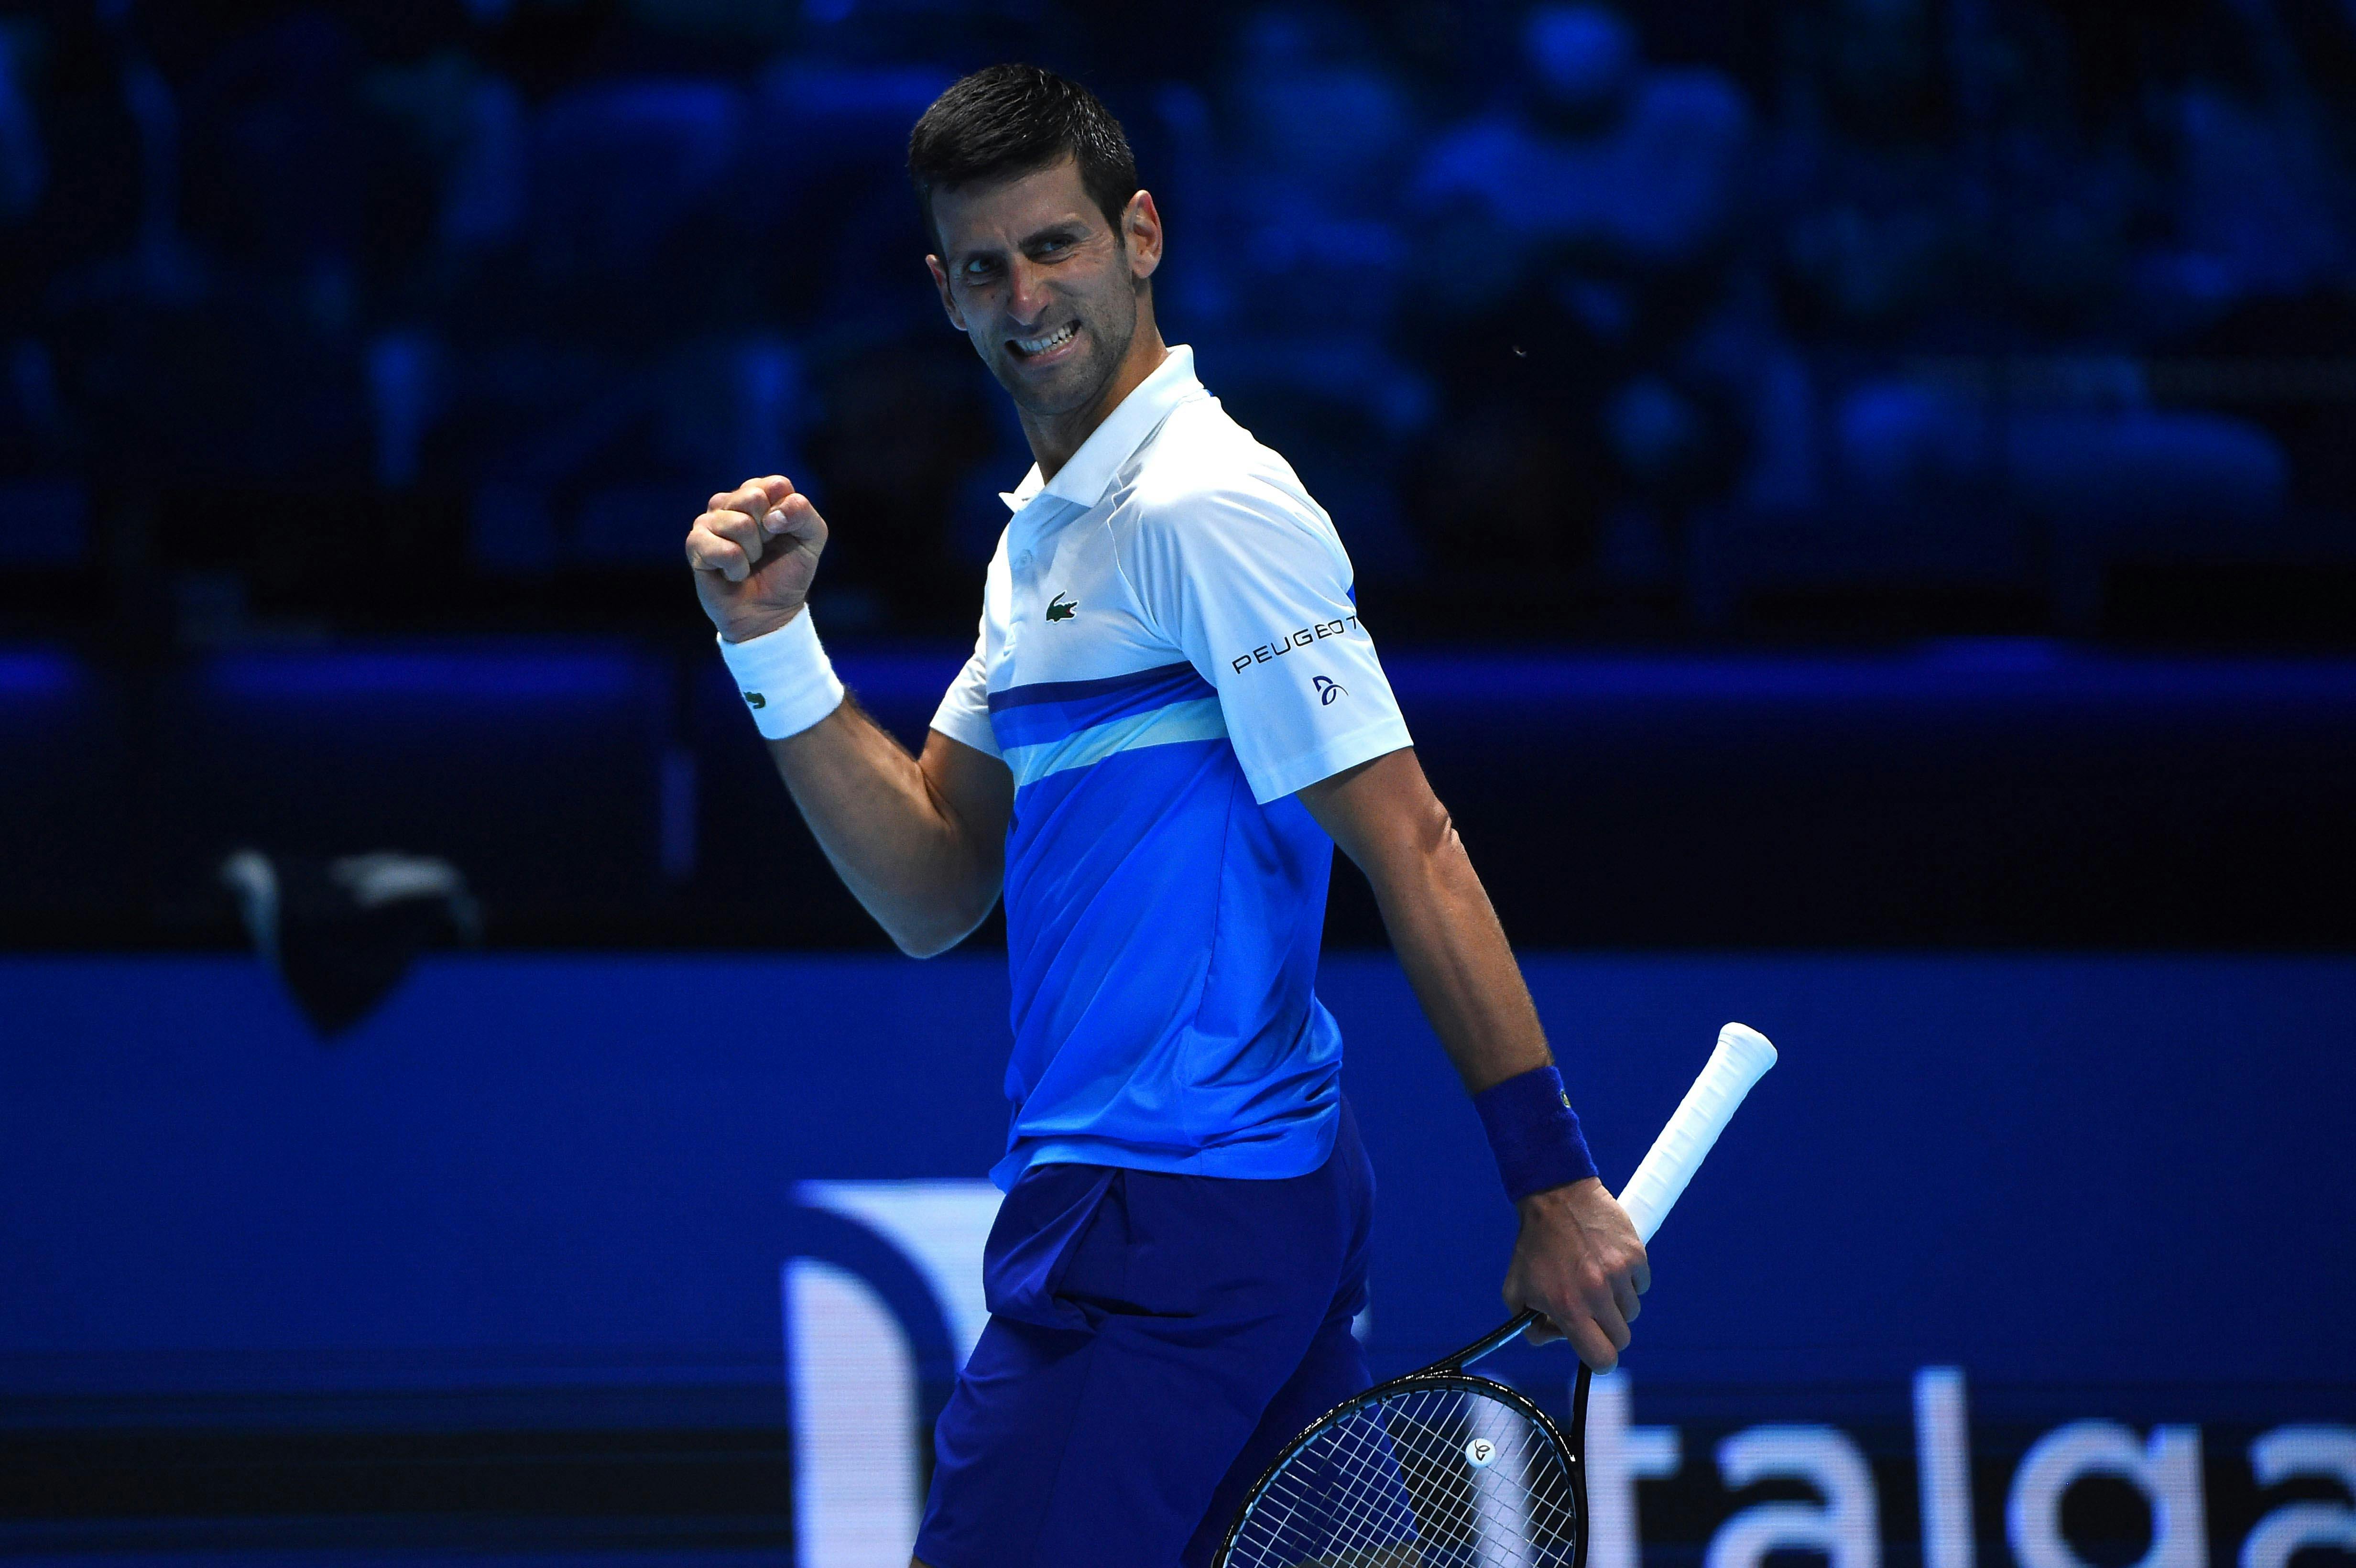 Novak Djokovic fist pumping as he qualifies for the semis at the 2021 ATP Finals